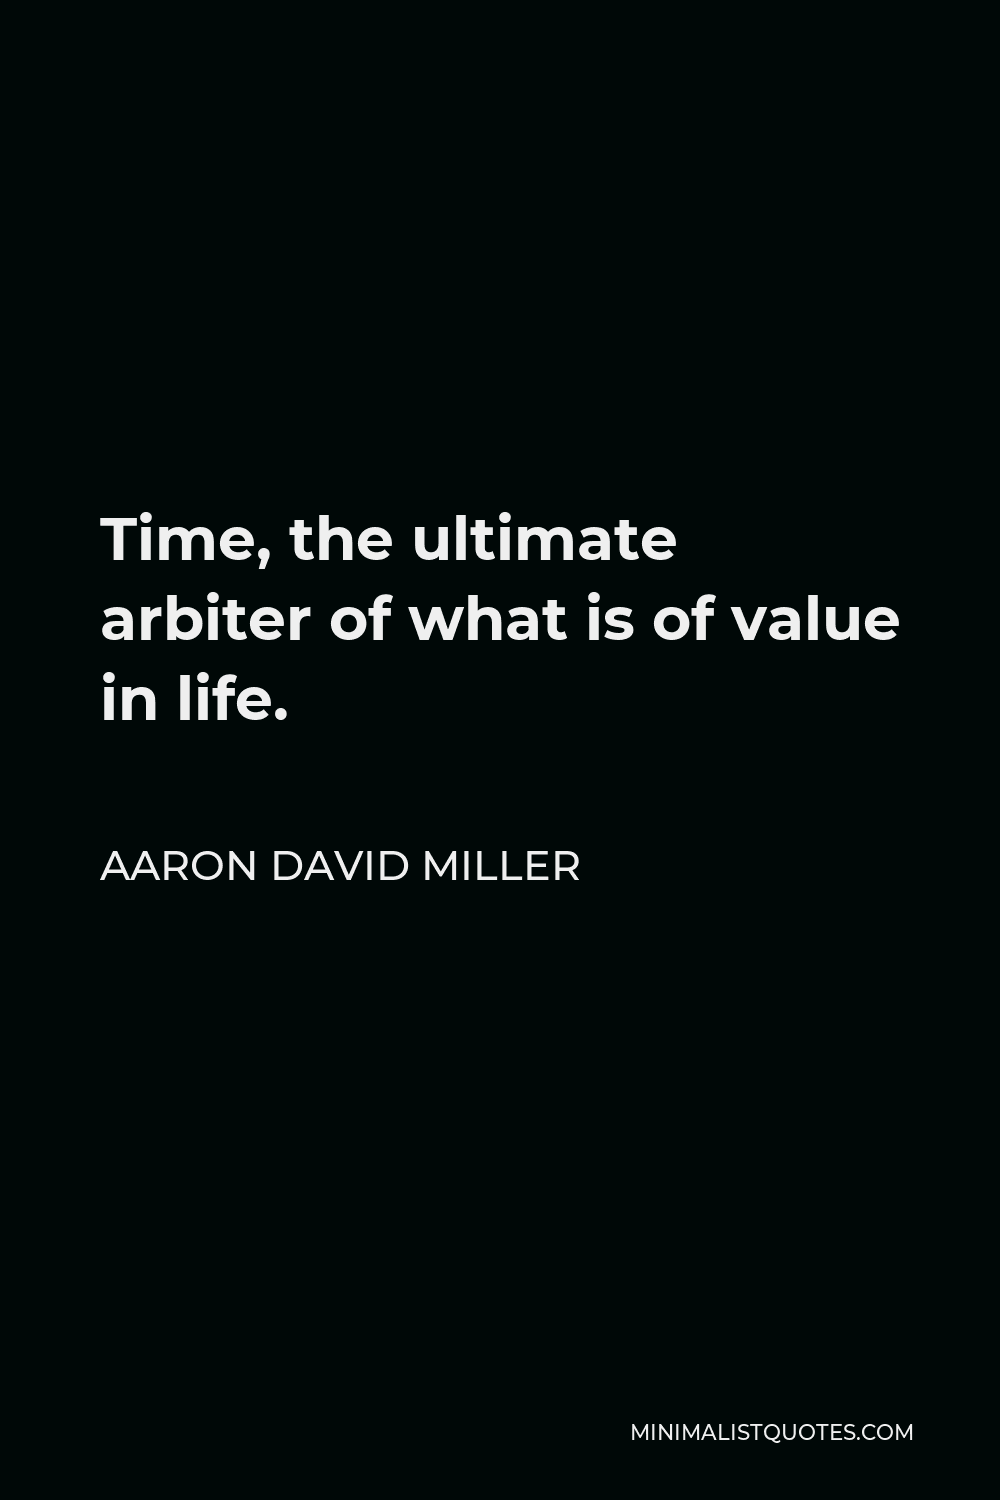 Aaron David Miller Quote - Time, the ultimate arbiter of what is of value in life.